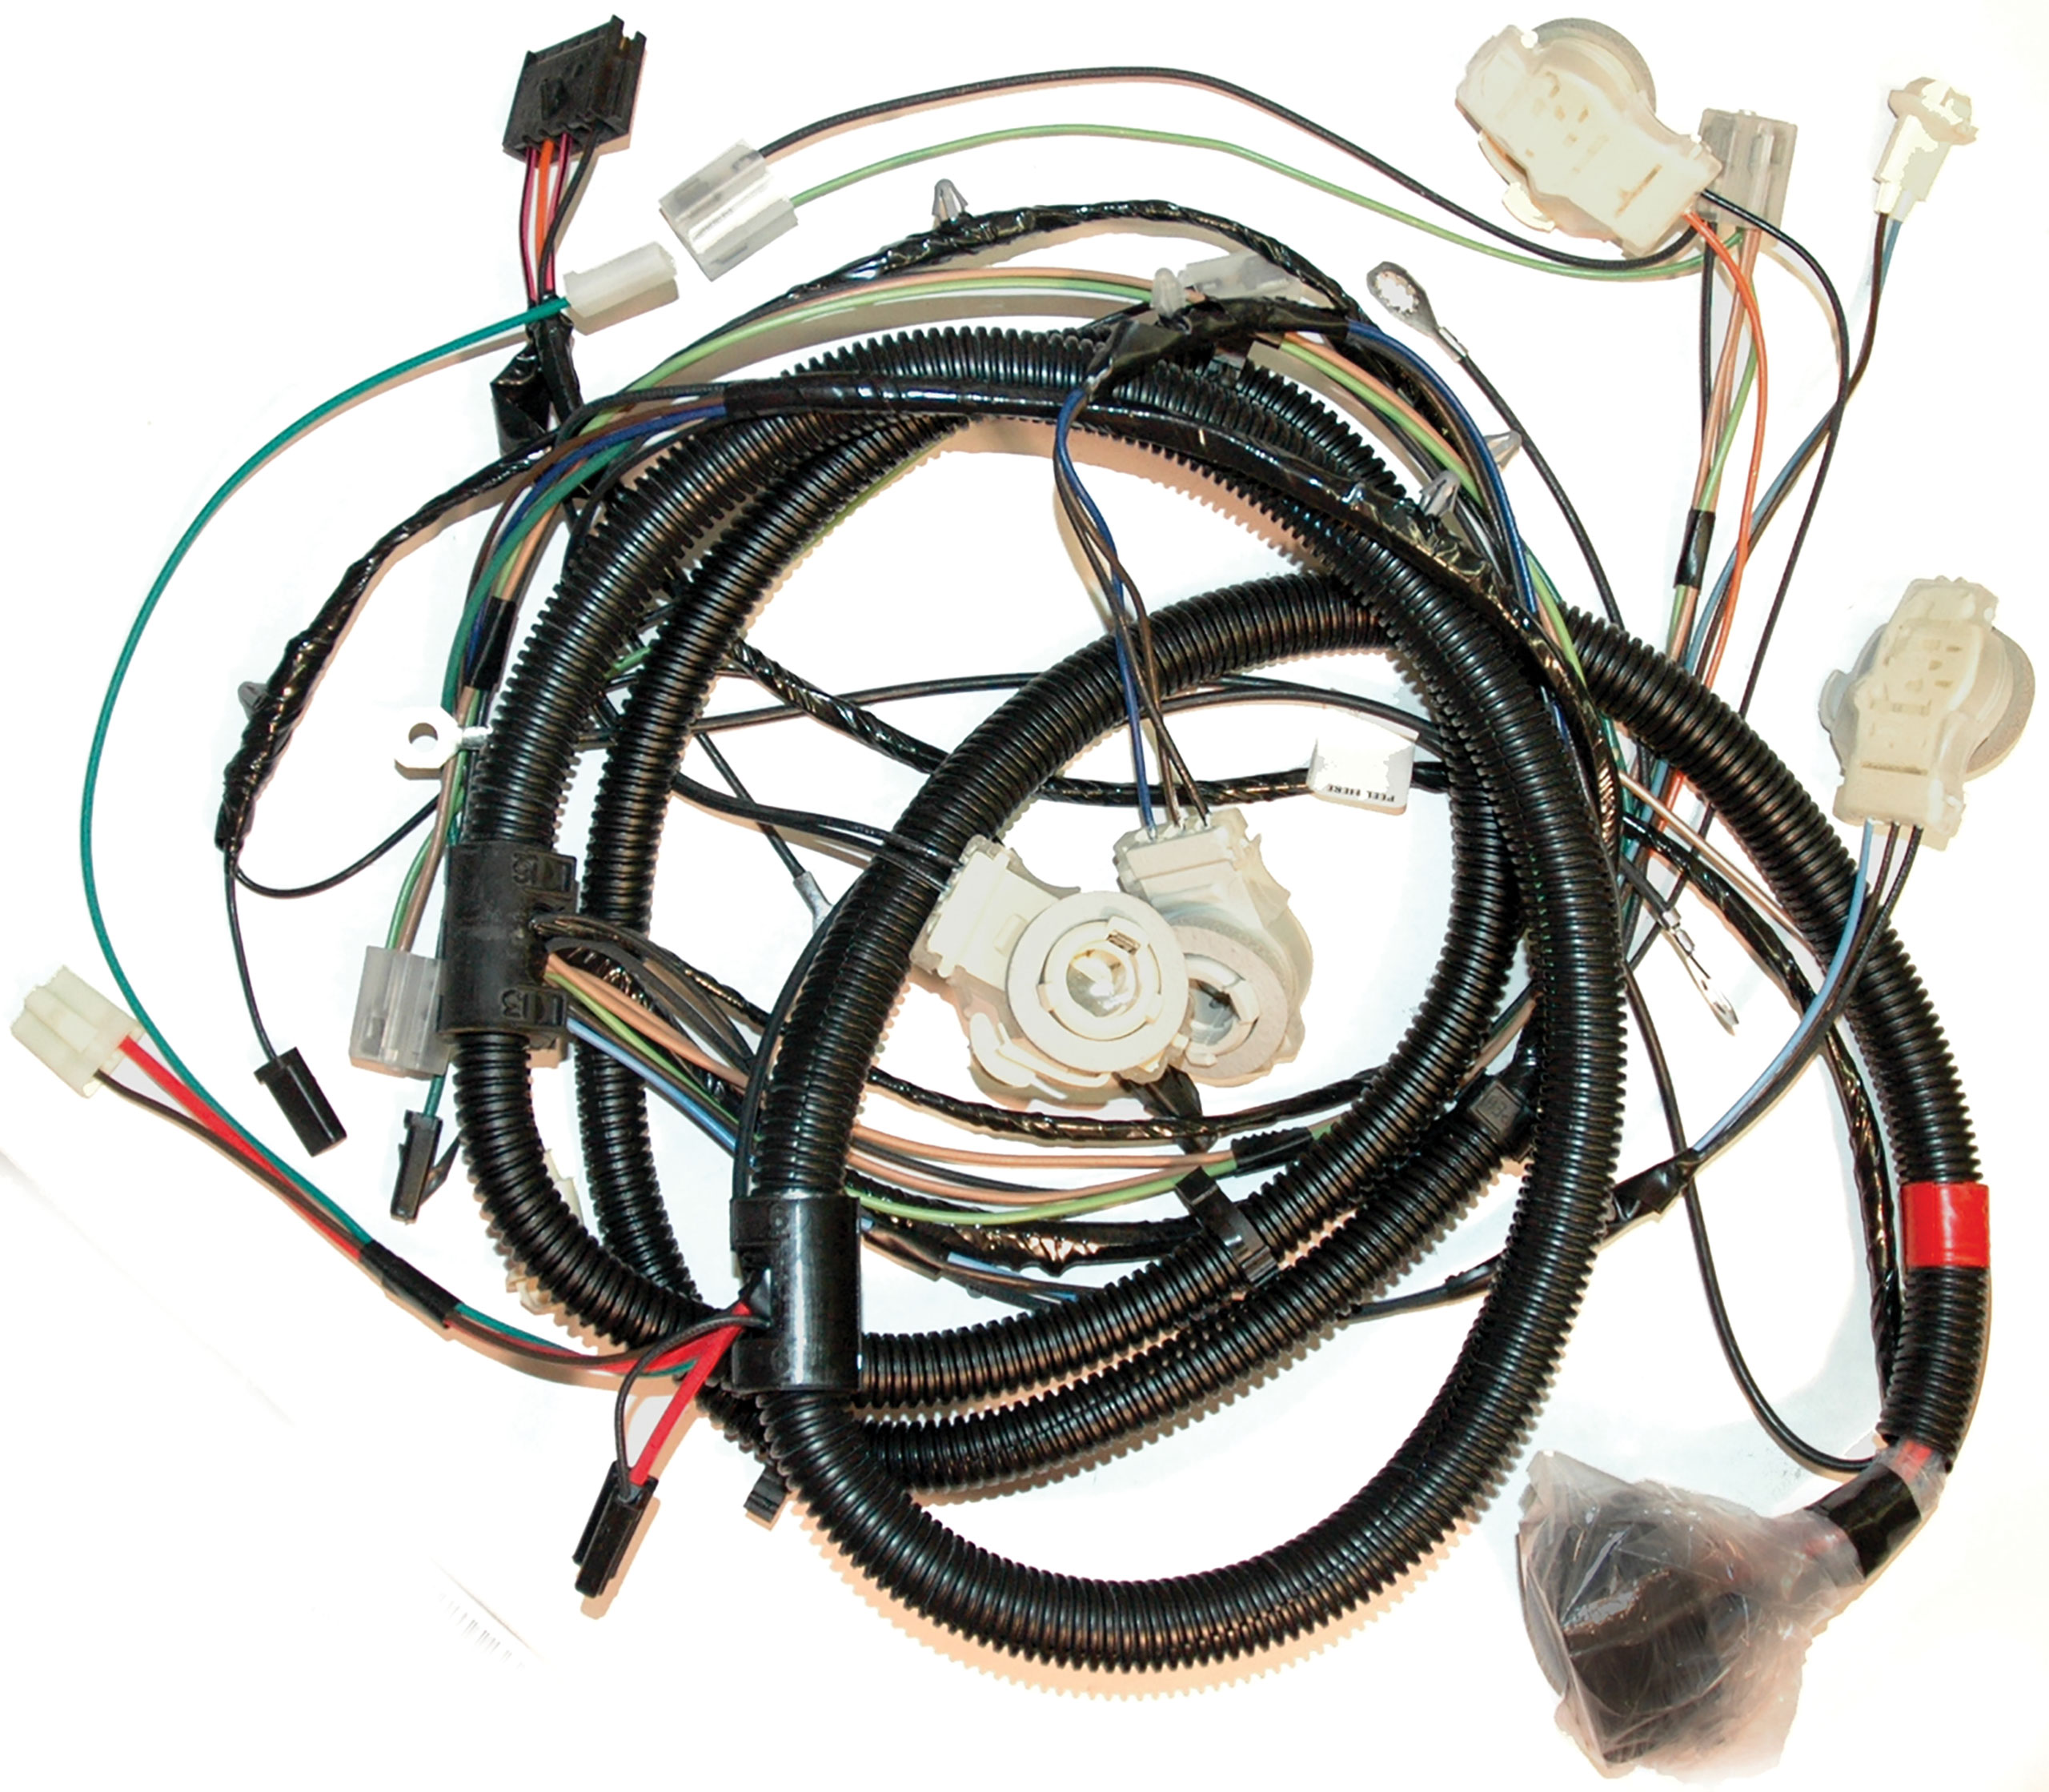 C3 1982 Chevrolet Corvette Harness. Front Lamp W/Wire To Alternator - Lectric Limited, Inc.